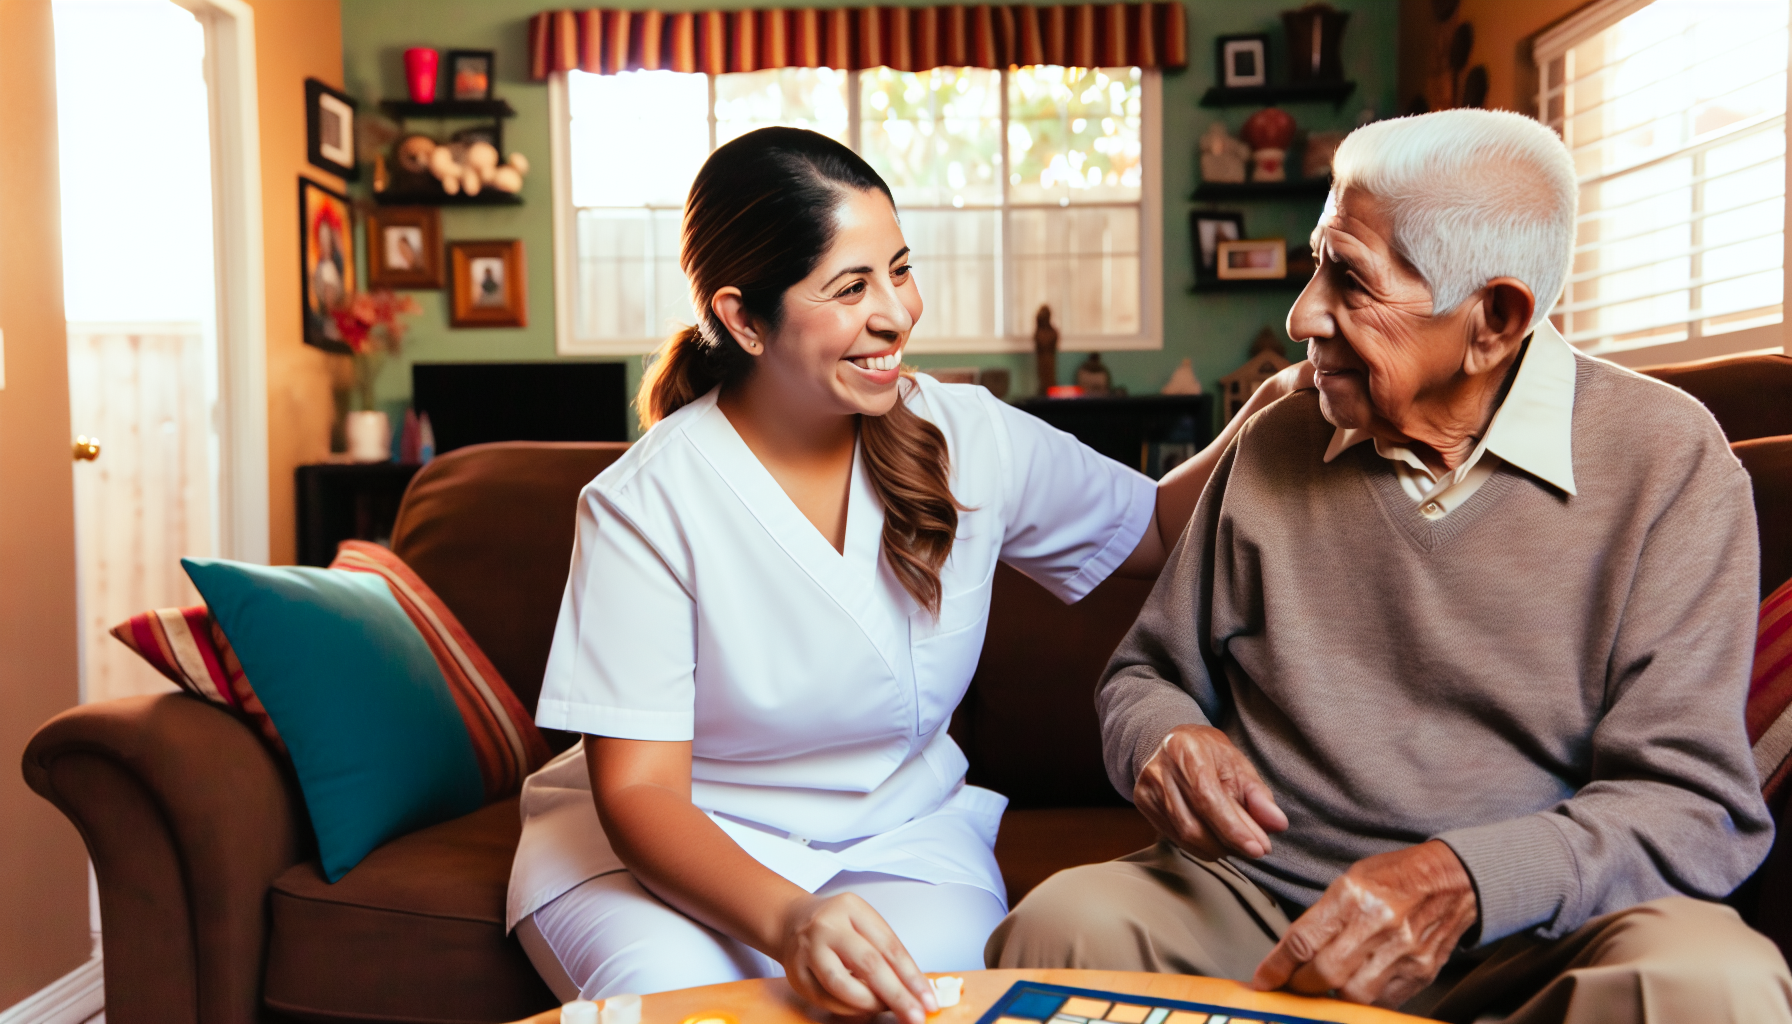 A home health aide assisting an elderly person